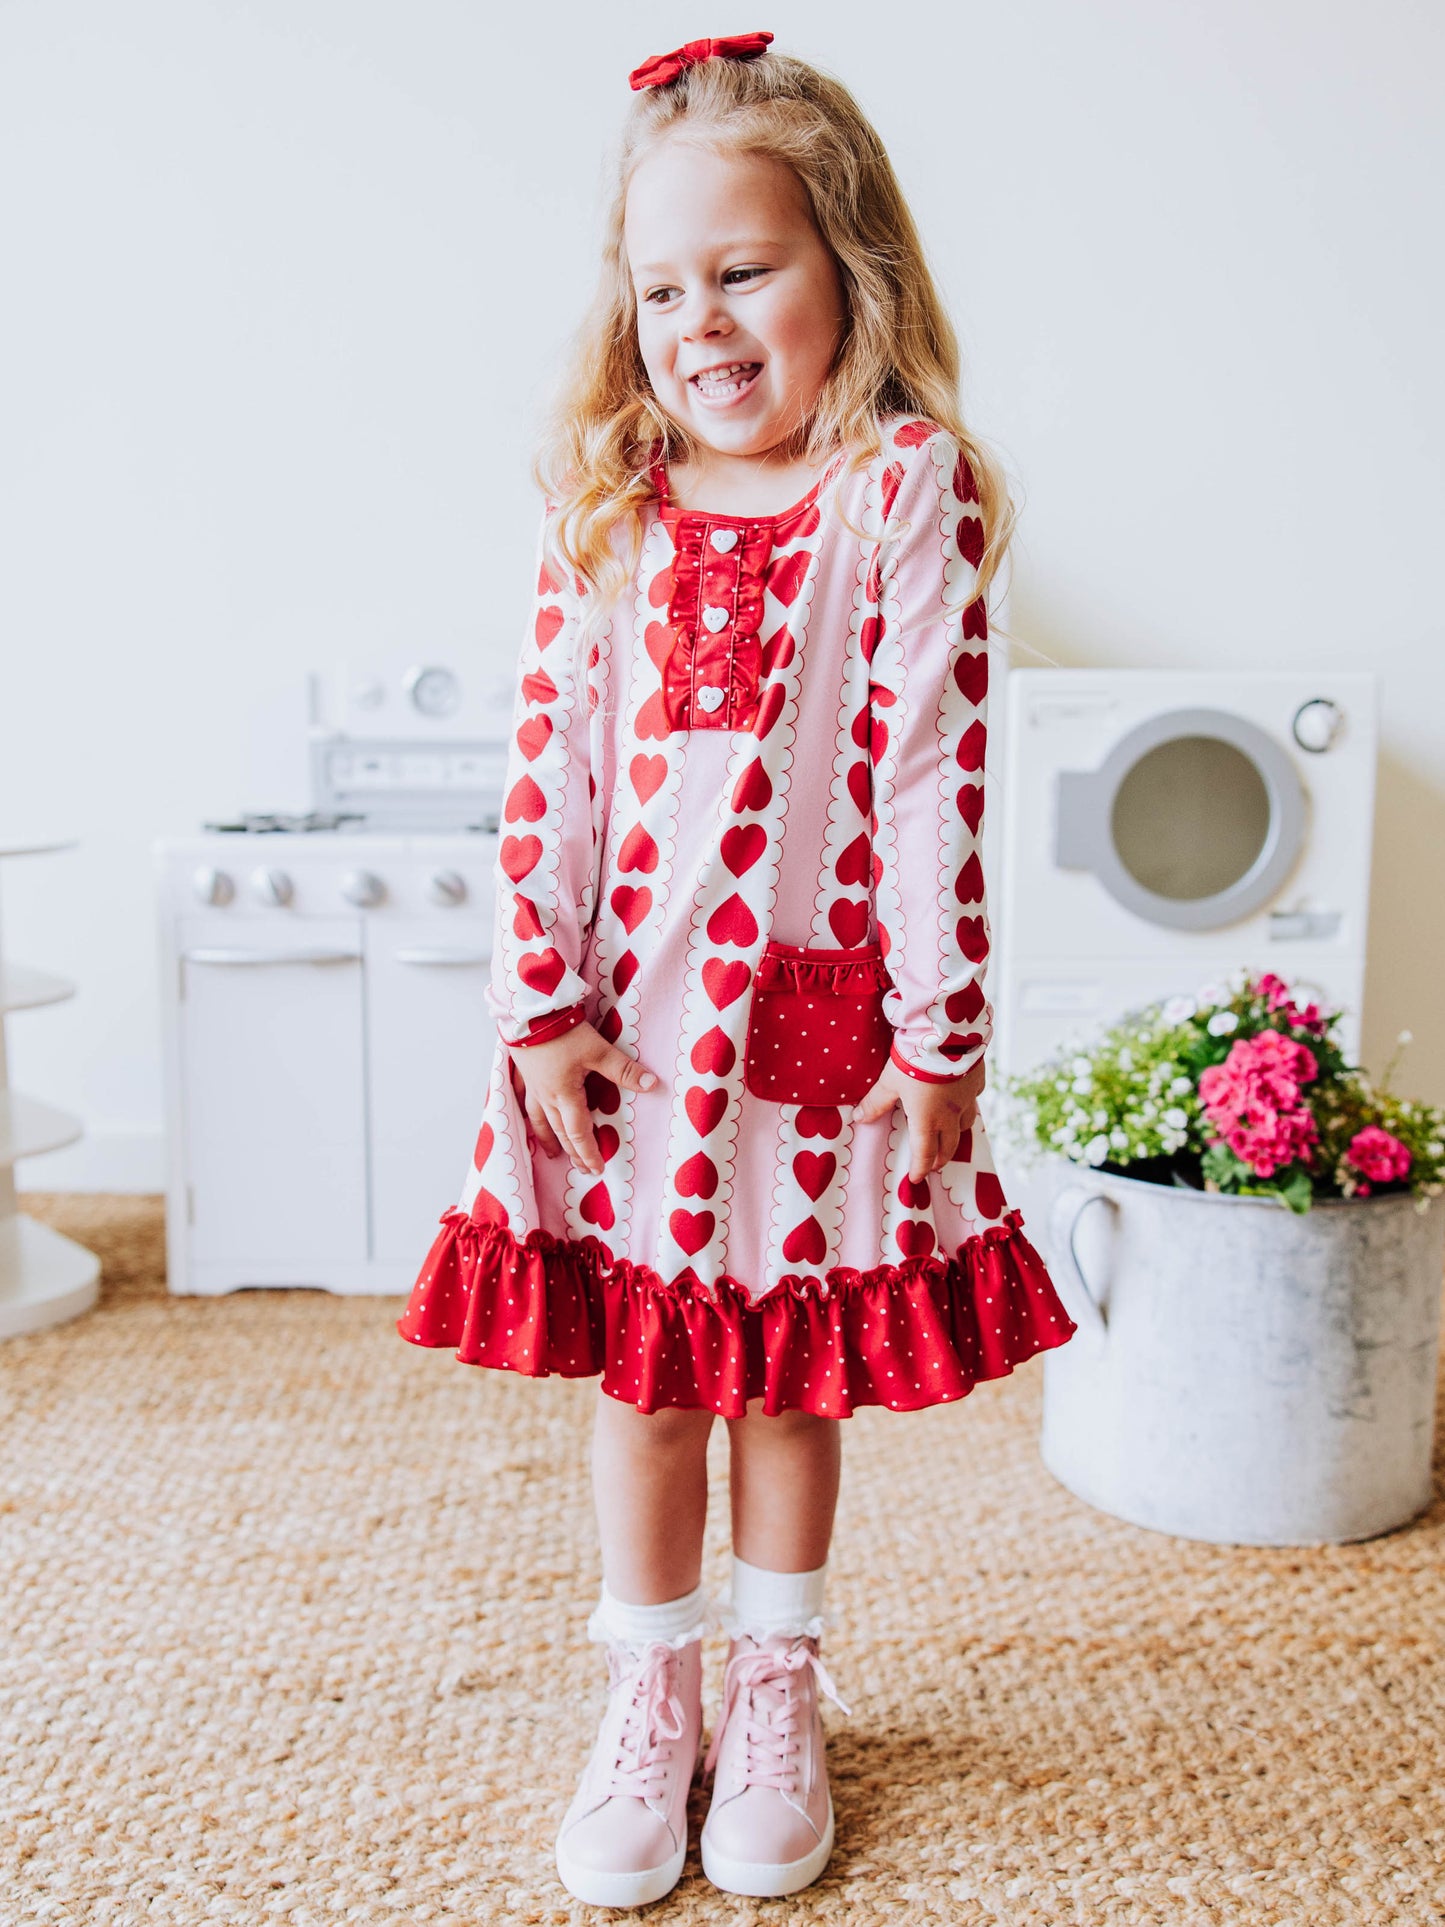 Everyday Play Dress - Blushing Mirrored Hearts